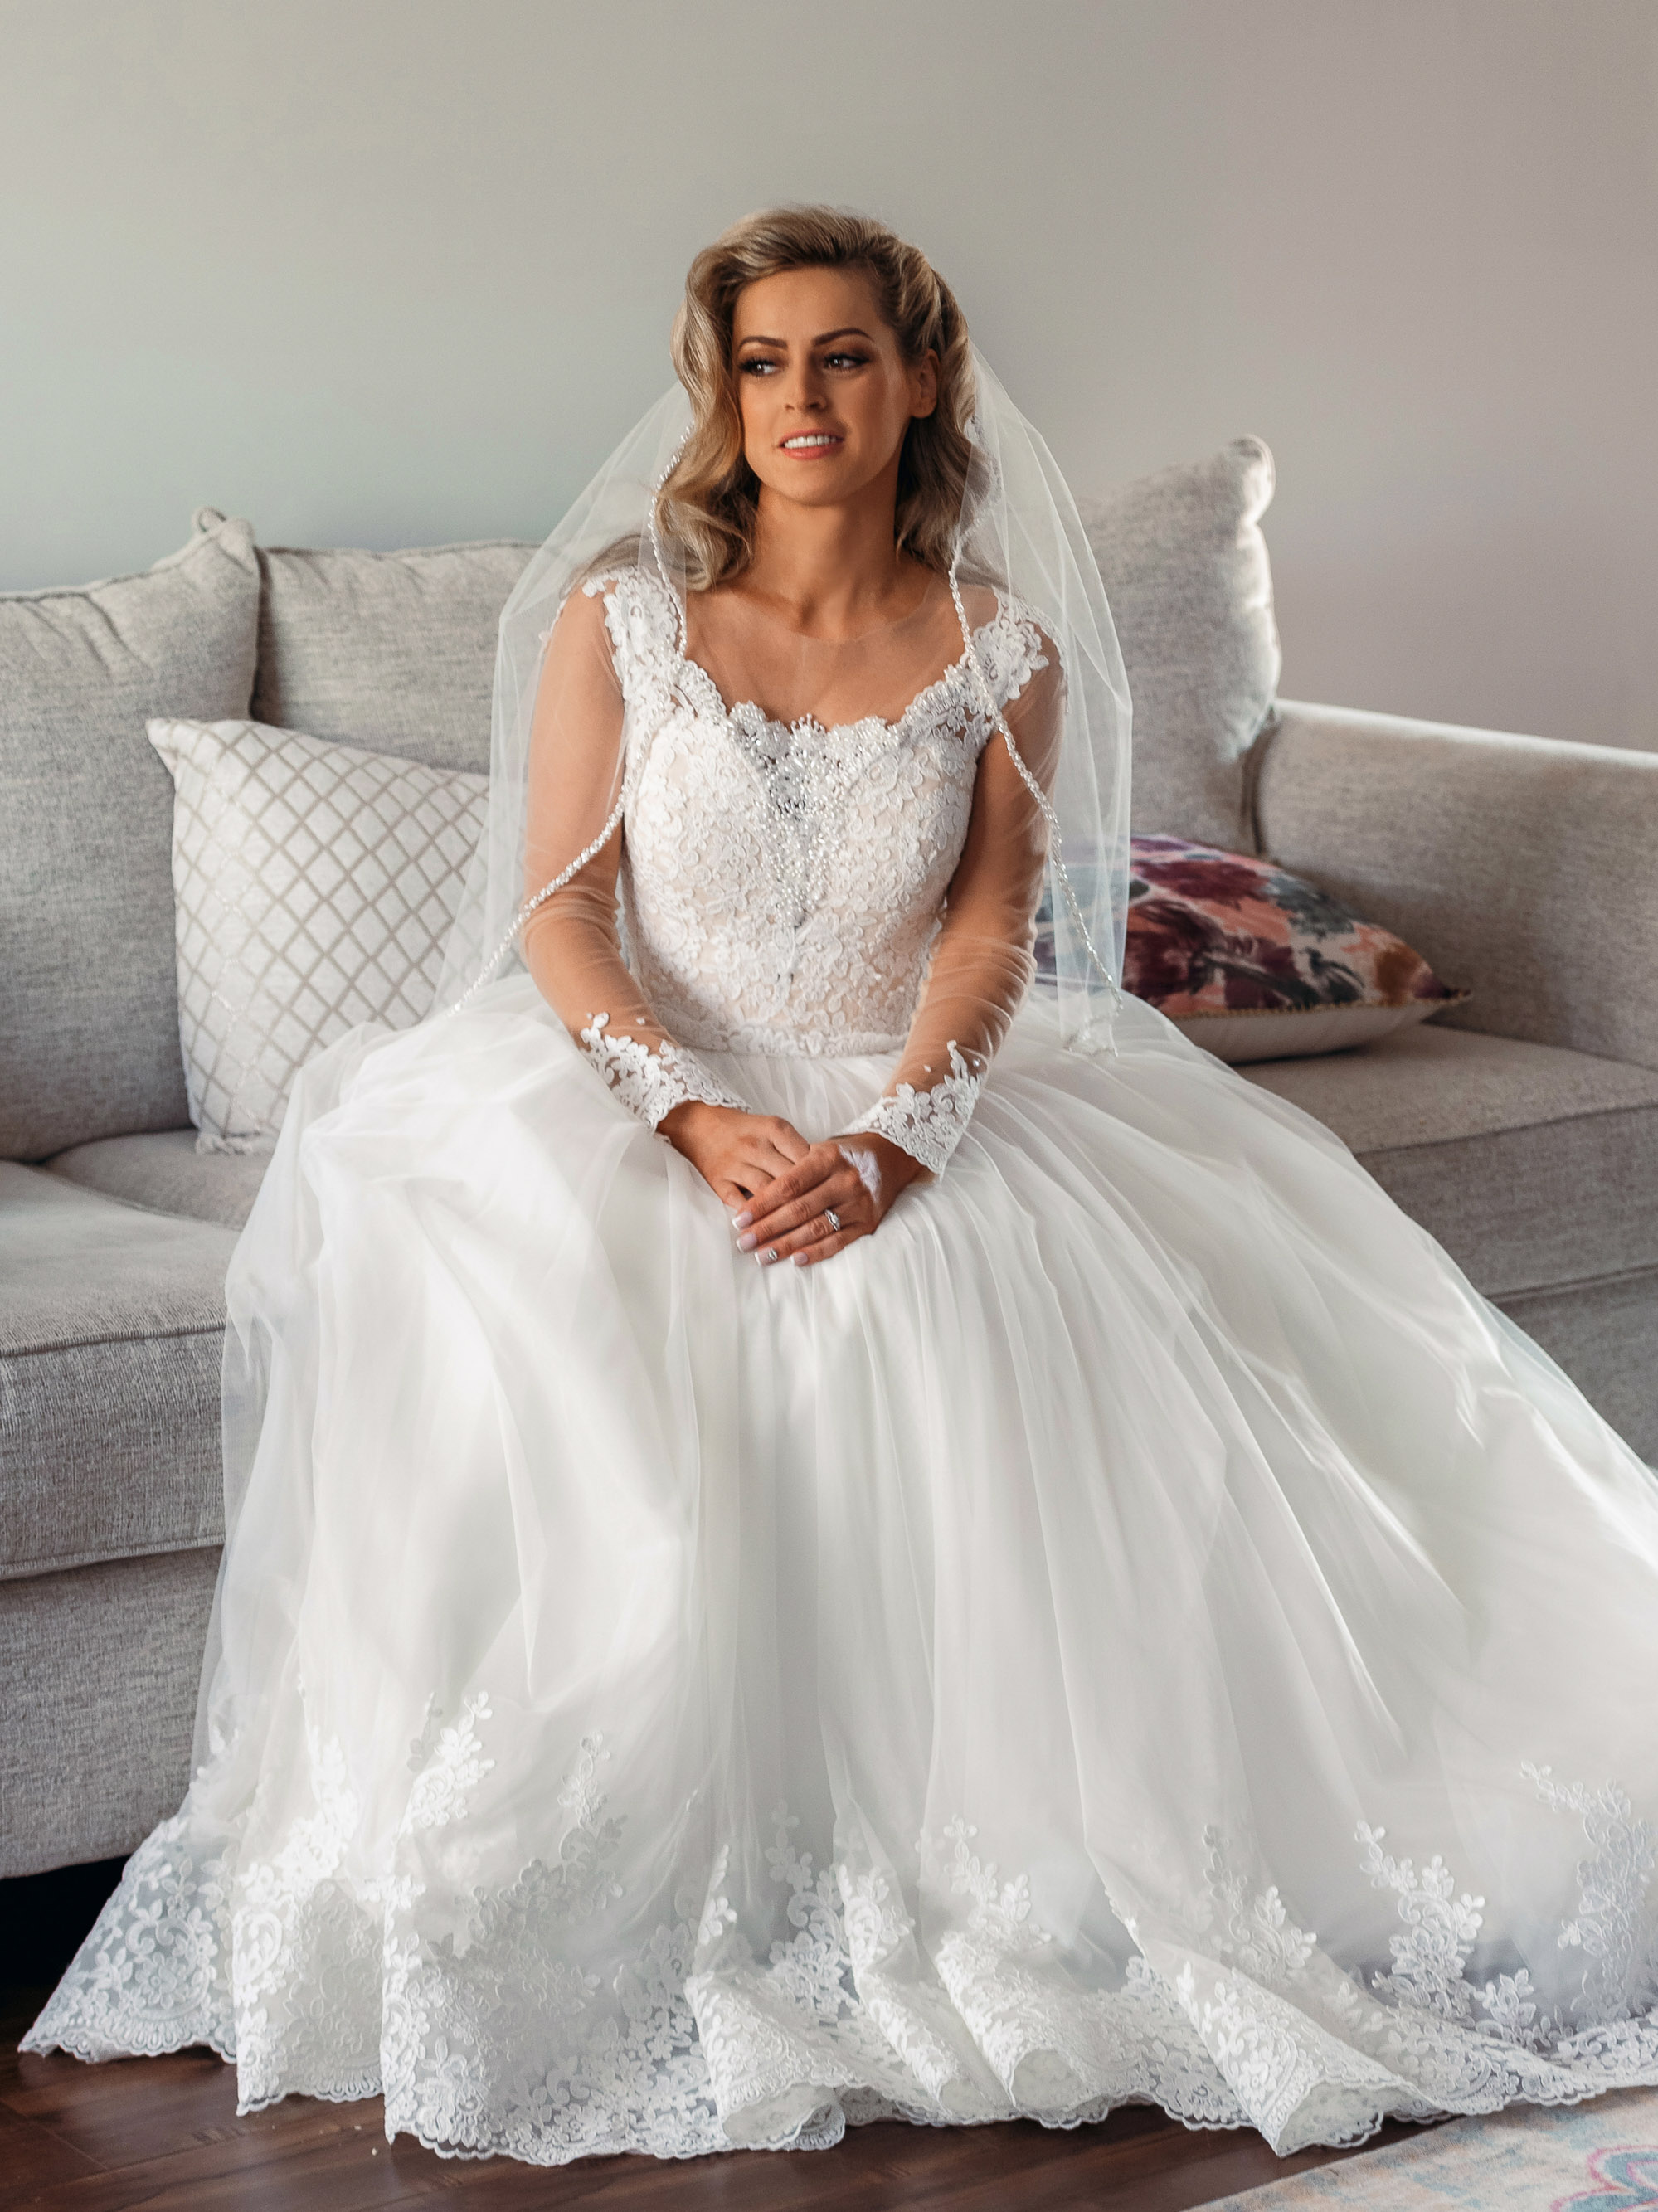 A bride in a wedding dress sitting on a couch.